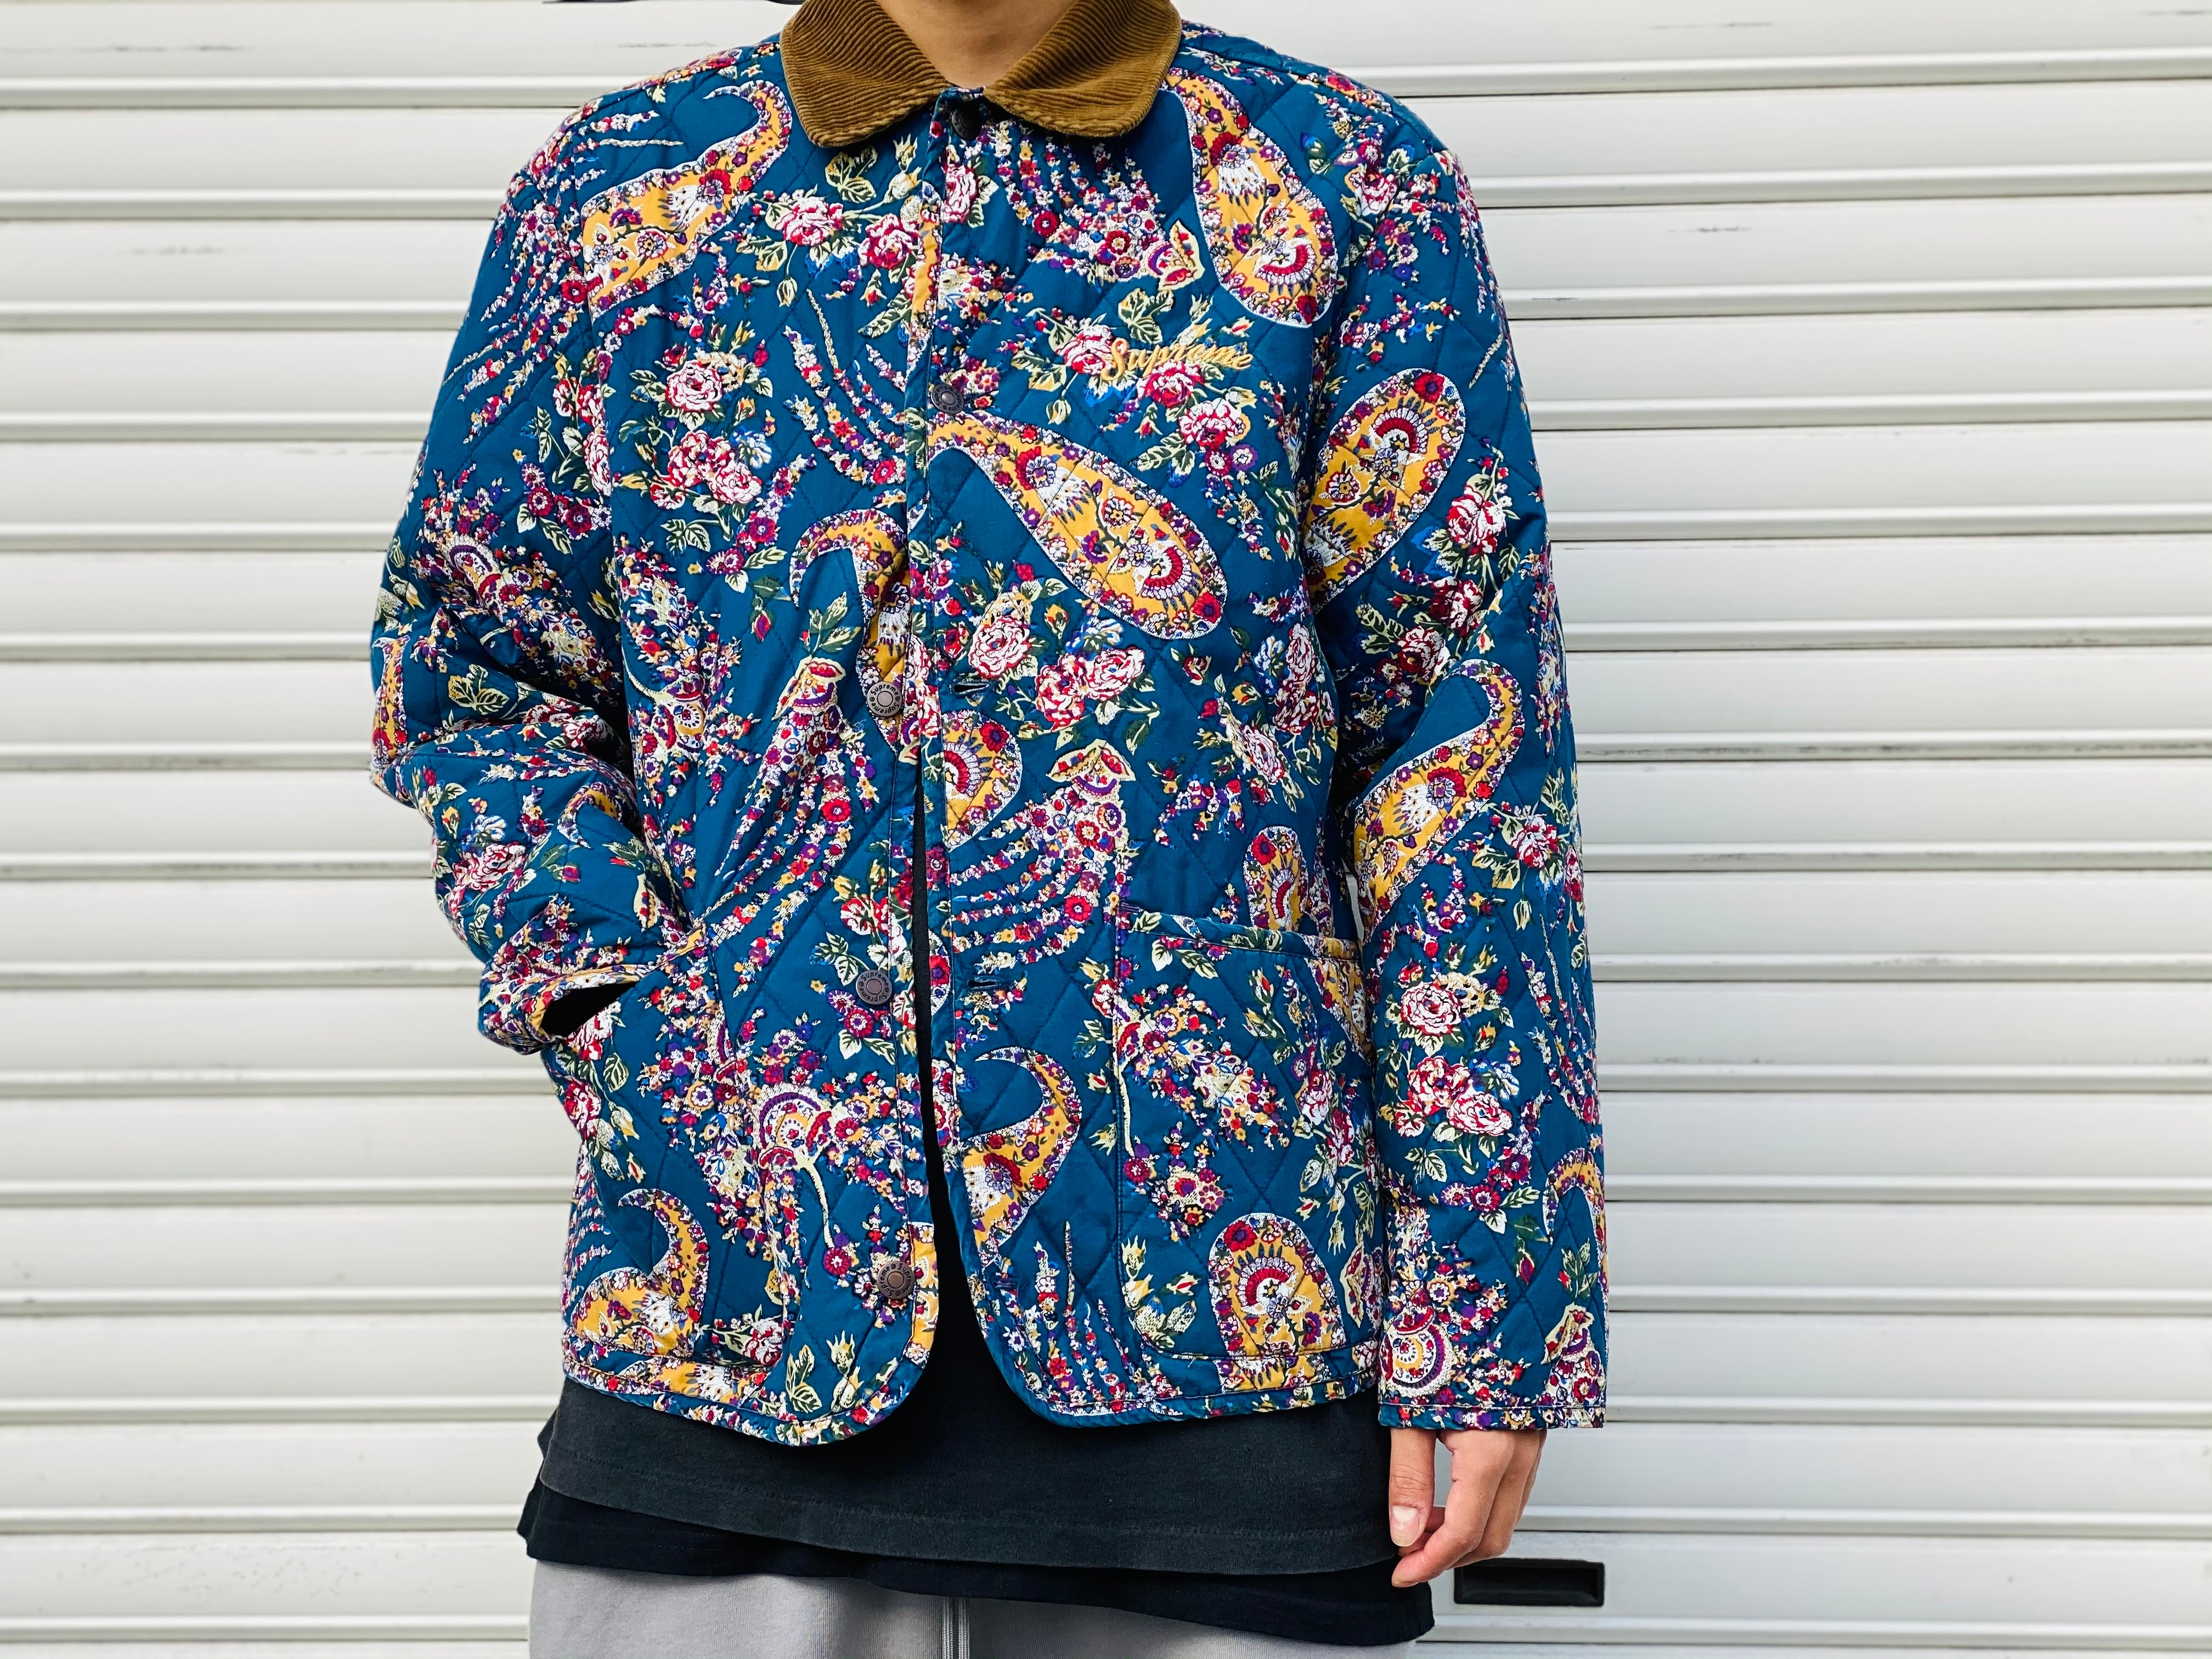 supreme Quilted Paisley